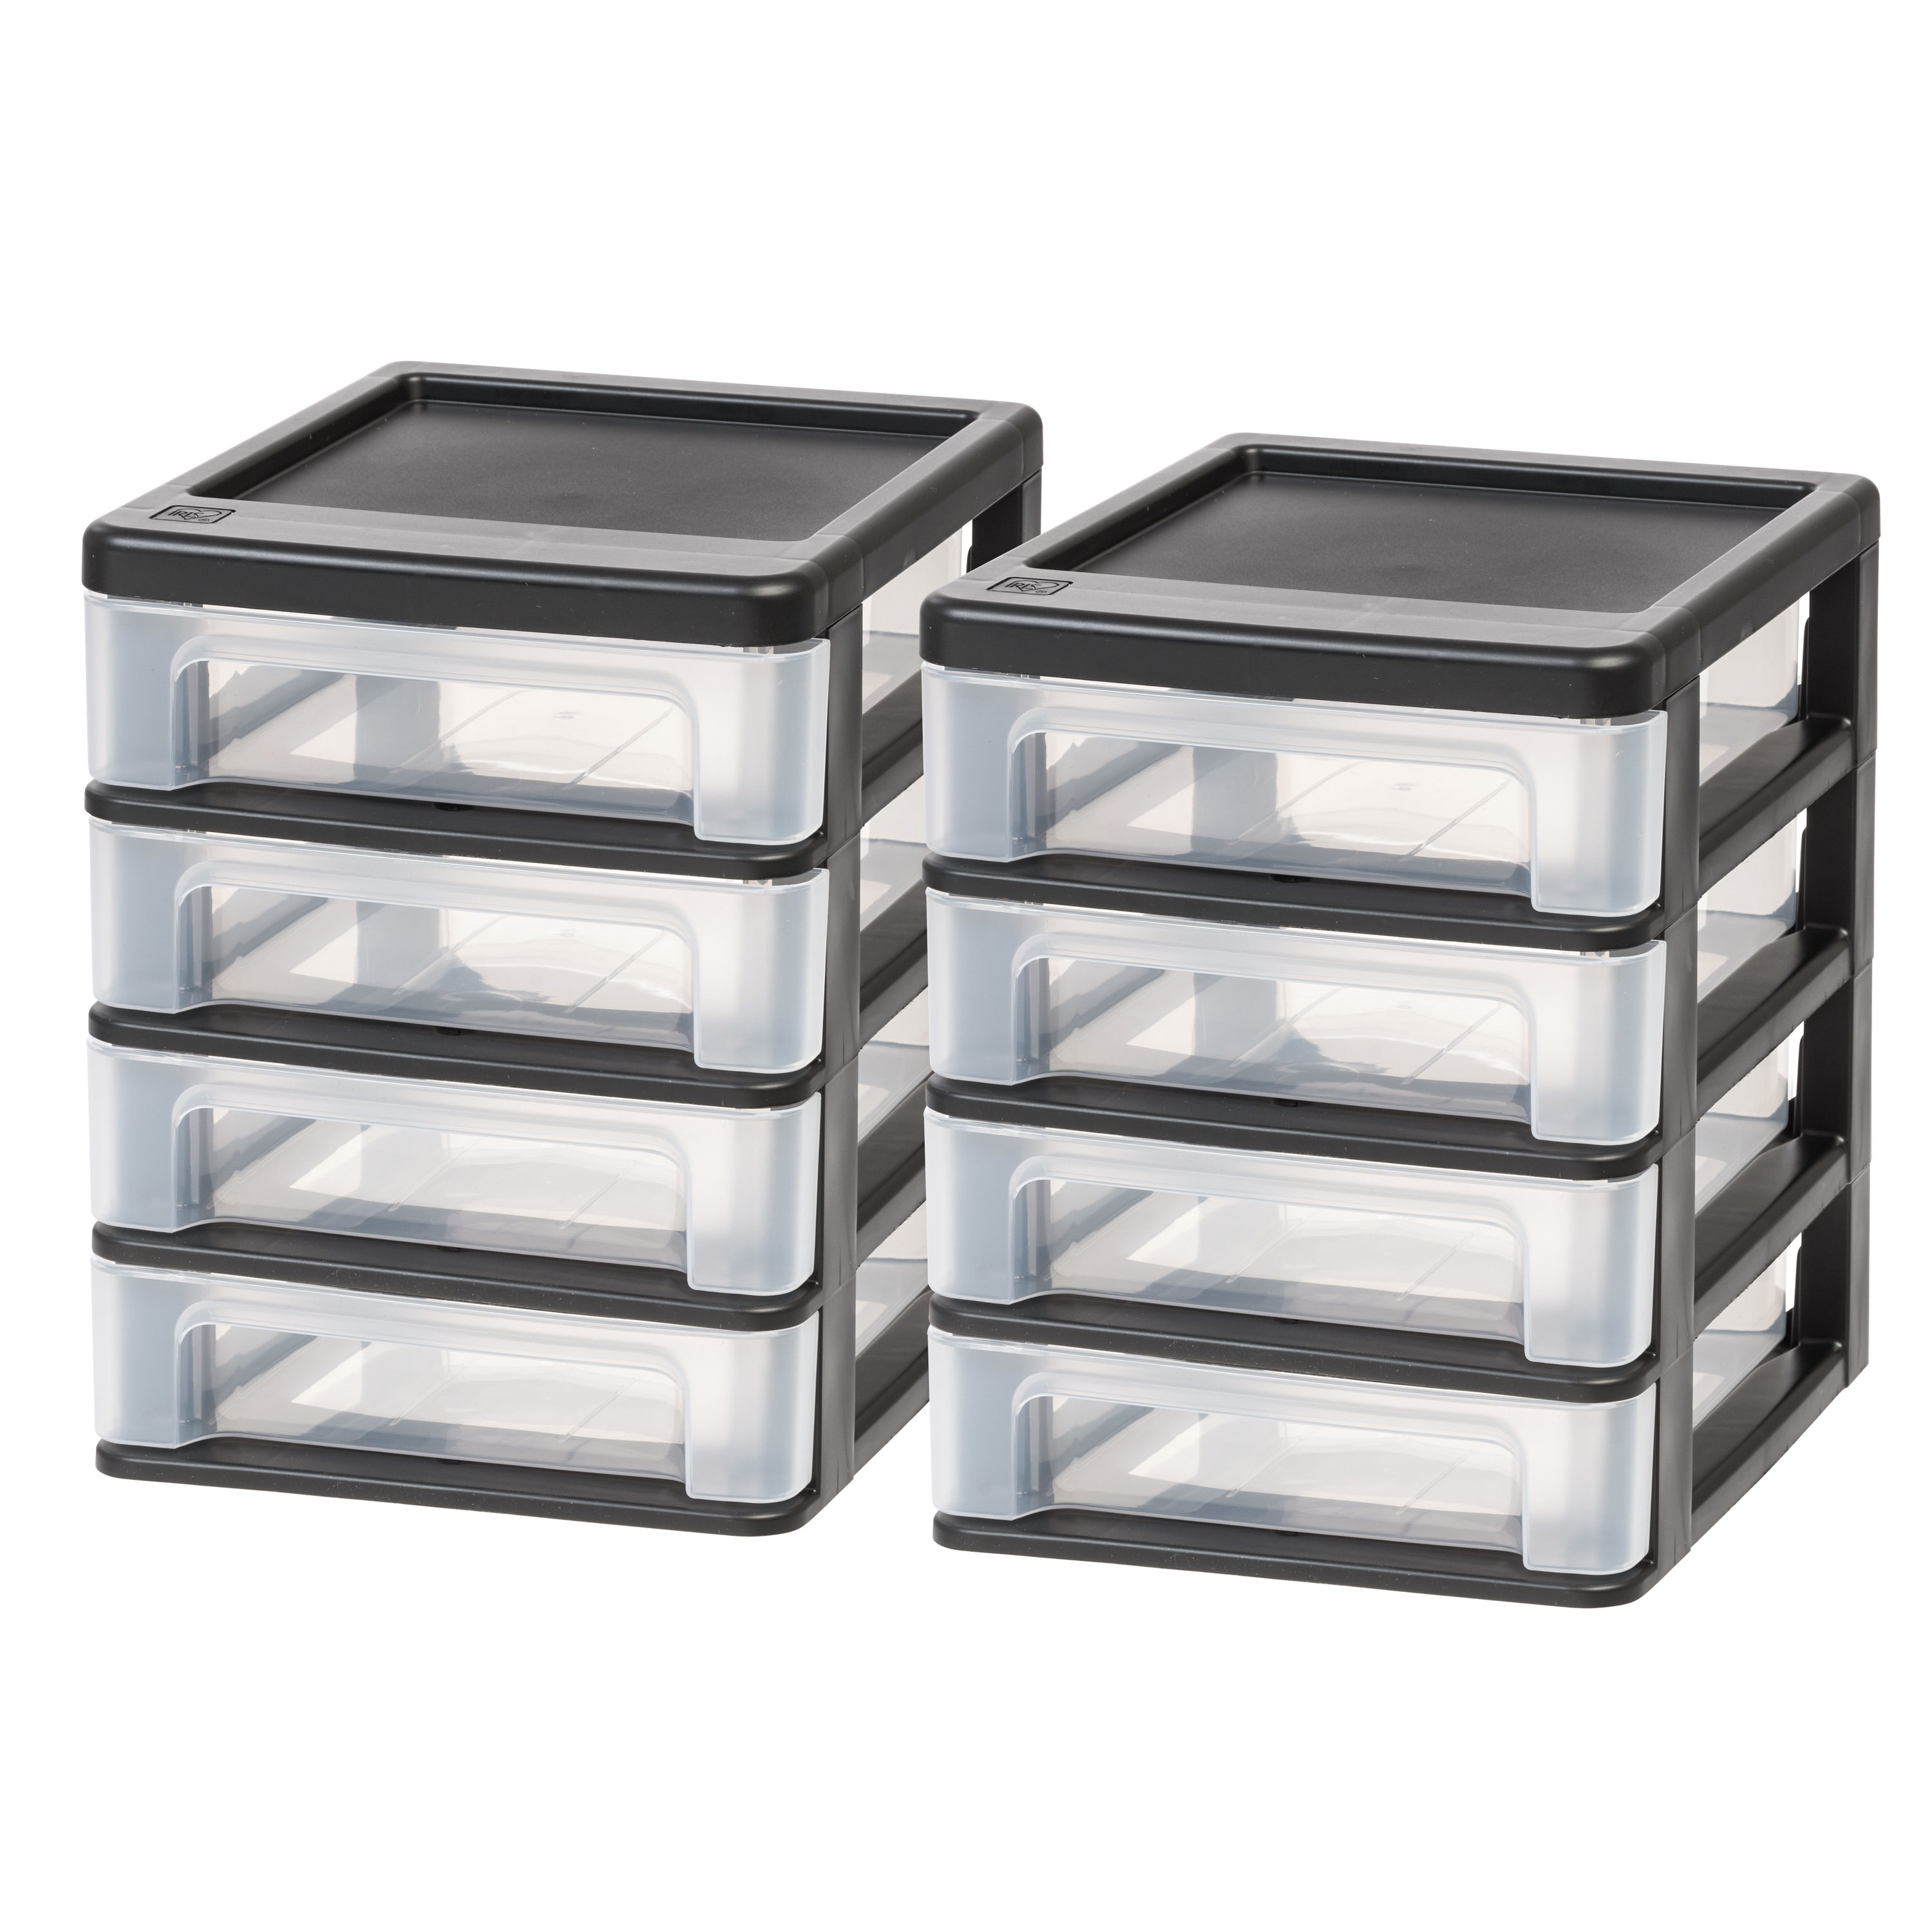 IRIS Plastic Clear Front Desktop Stacking Drawers w/ Rubber Feet, 6 Pack,  Black, 1 Piece - Food 4 Less